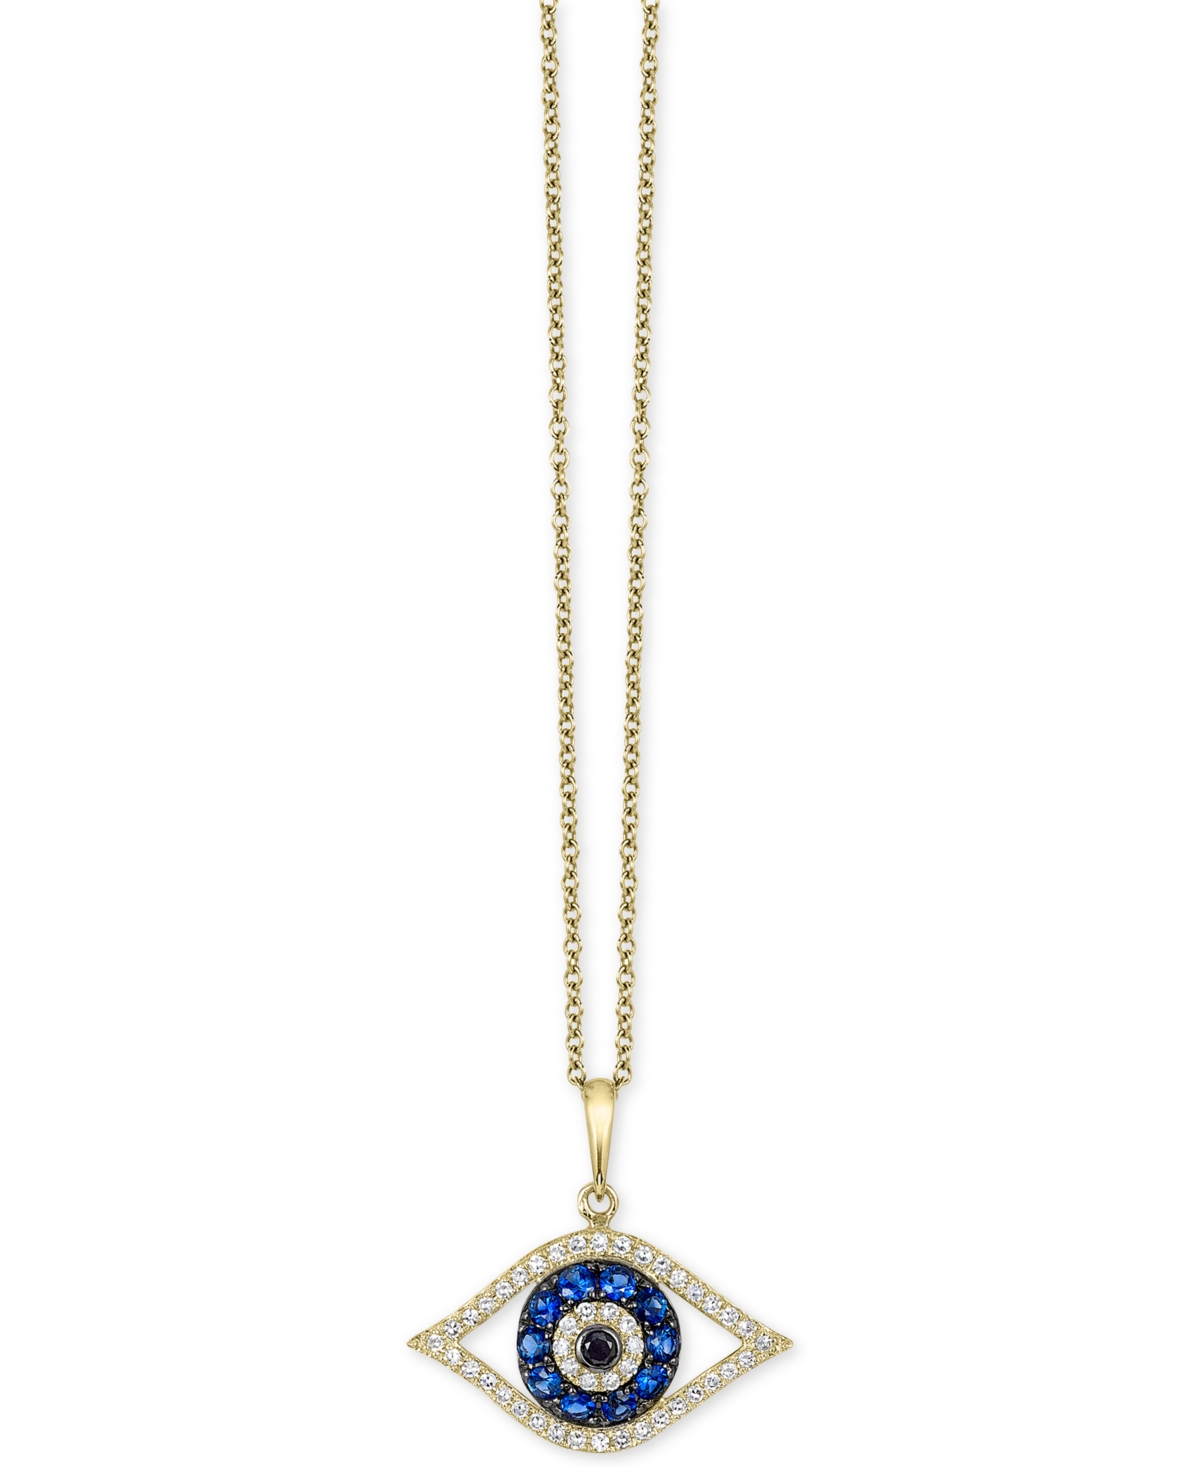 Effy Collection Effy Sapphire (1/4 ct. t.w.) and Black and White Diamond (1/8 ct. t.w.) Evil Eye Pendant in 14k Gold